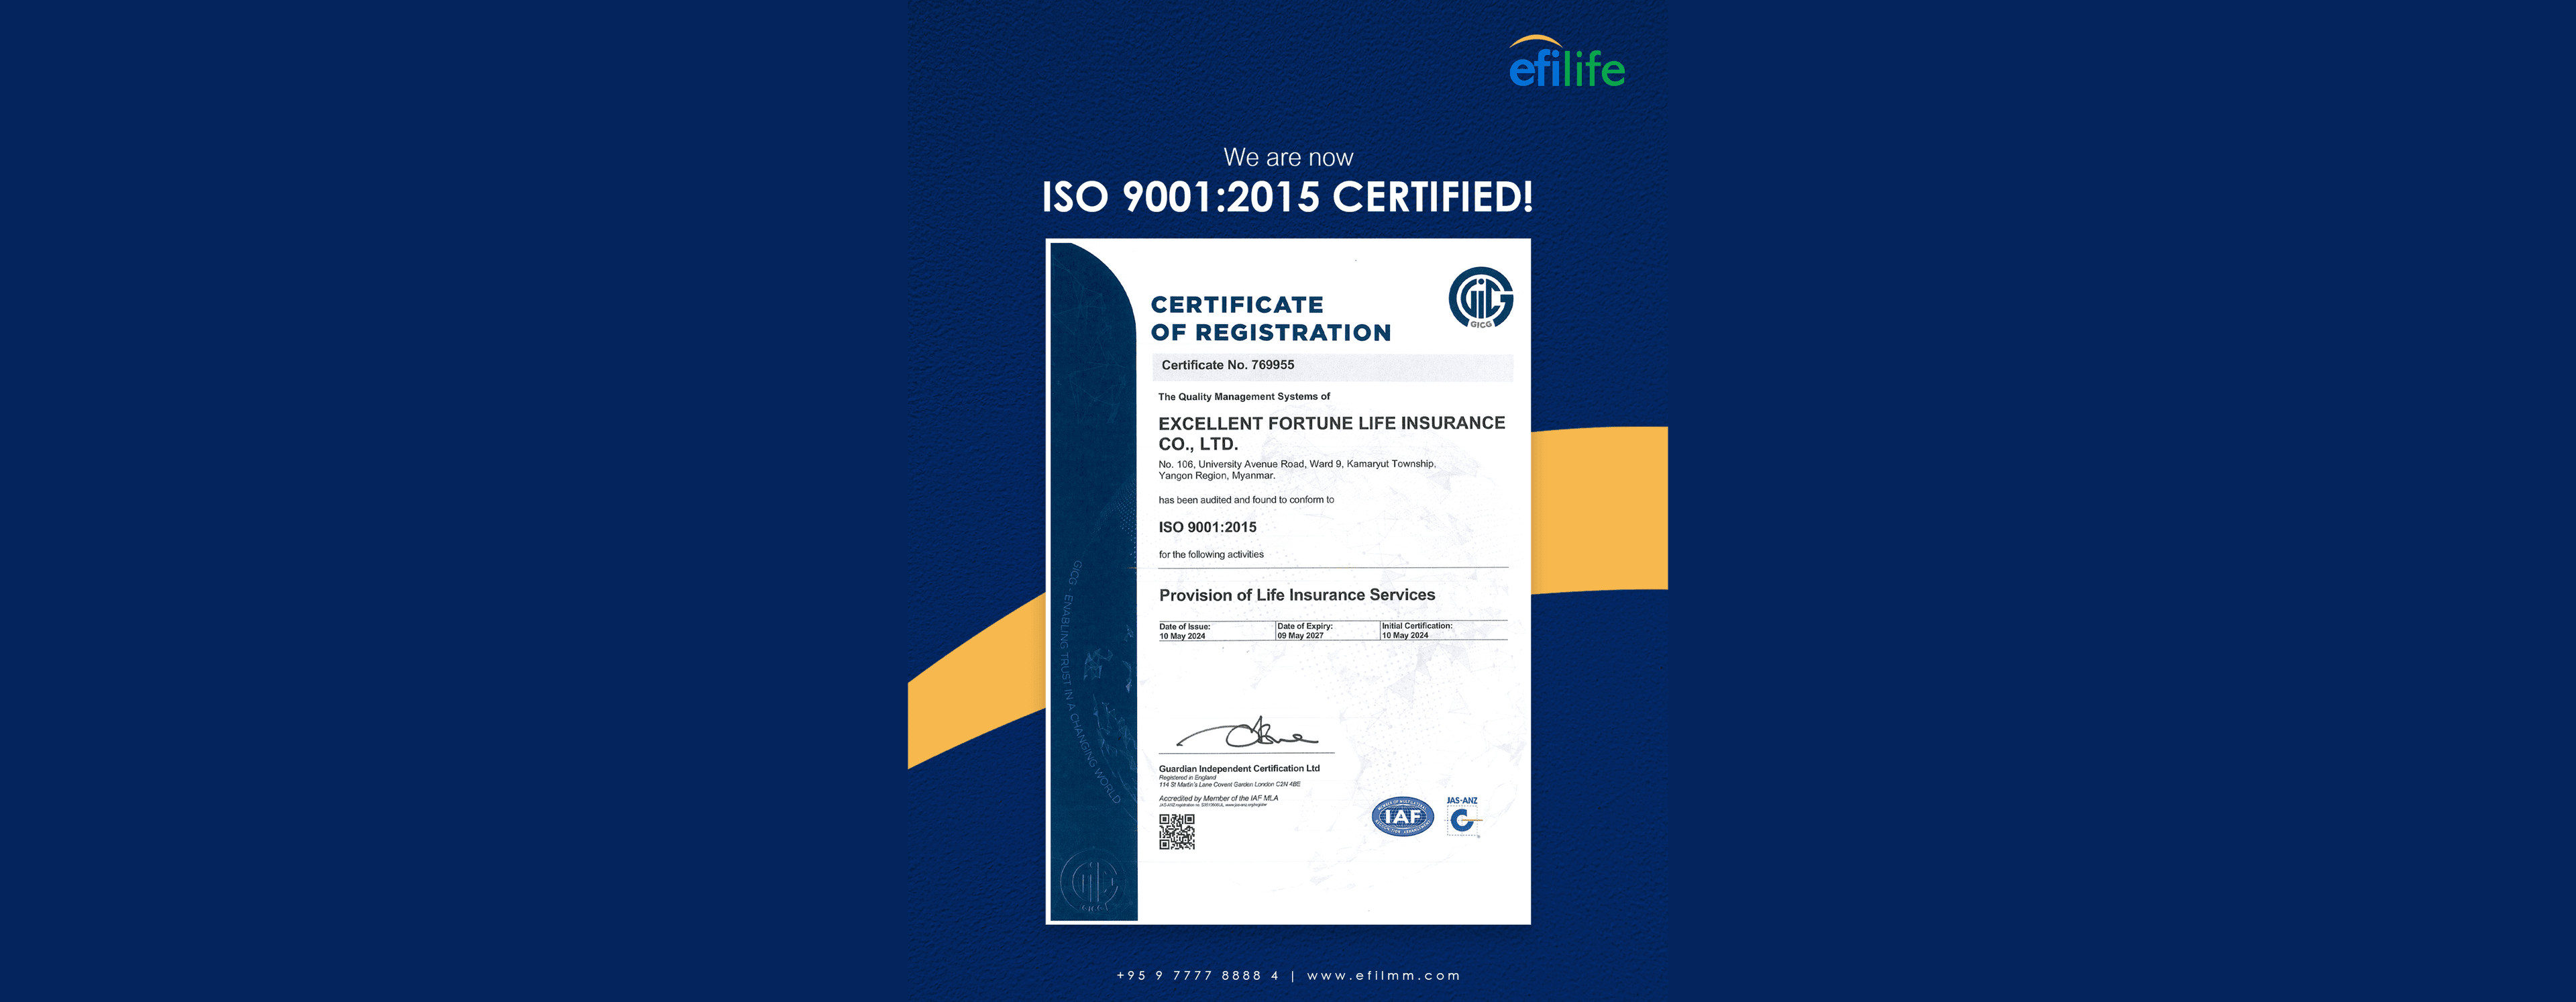 RECEIVING OF “ISO 9001:2015” QUALITY MANAGEMENT SYSTEM CERTIFICATION BY EXCELLENT FORTUNE LIFE INSURANCE